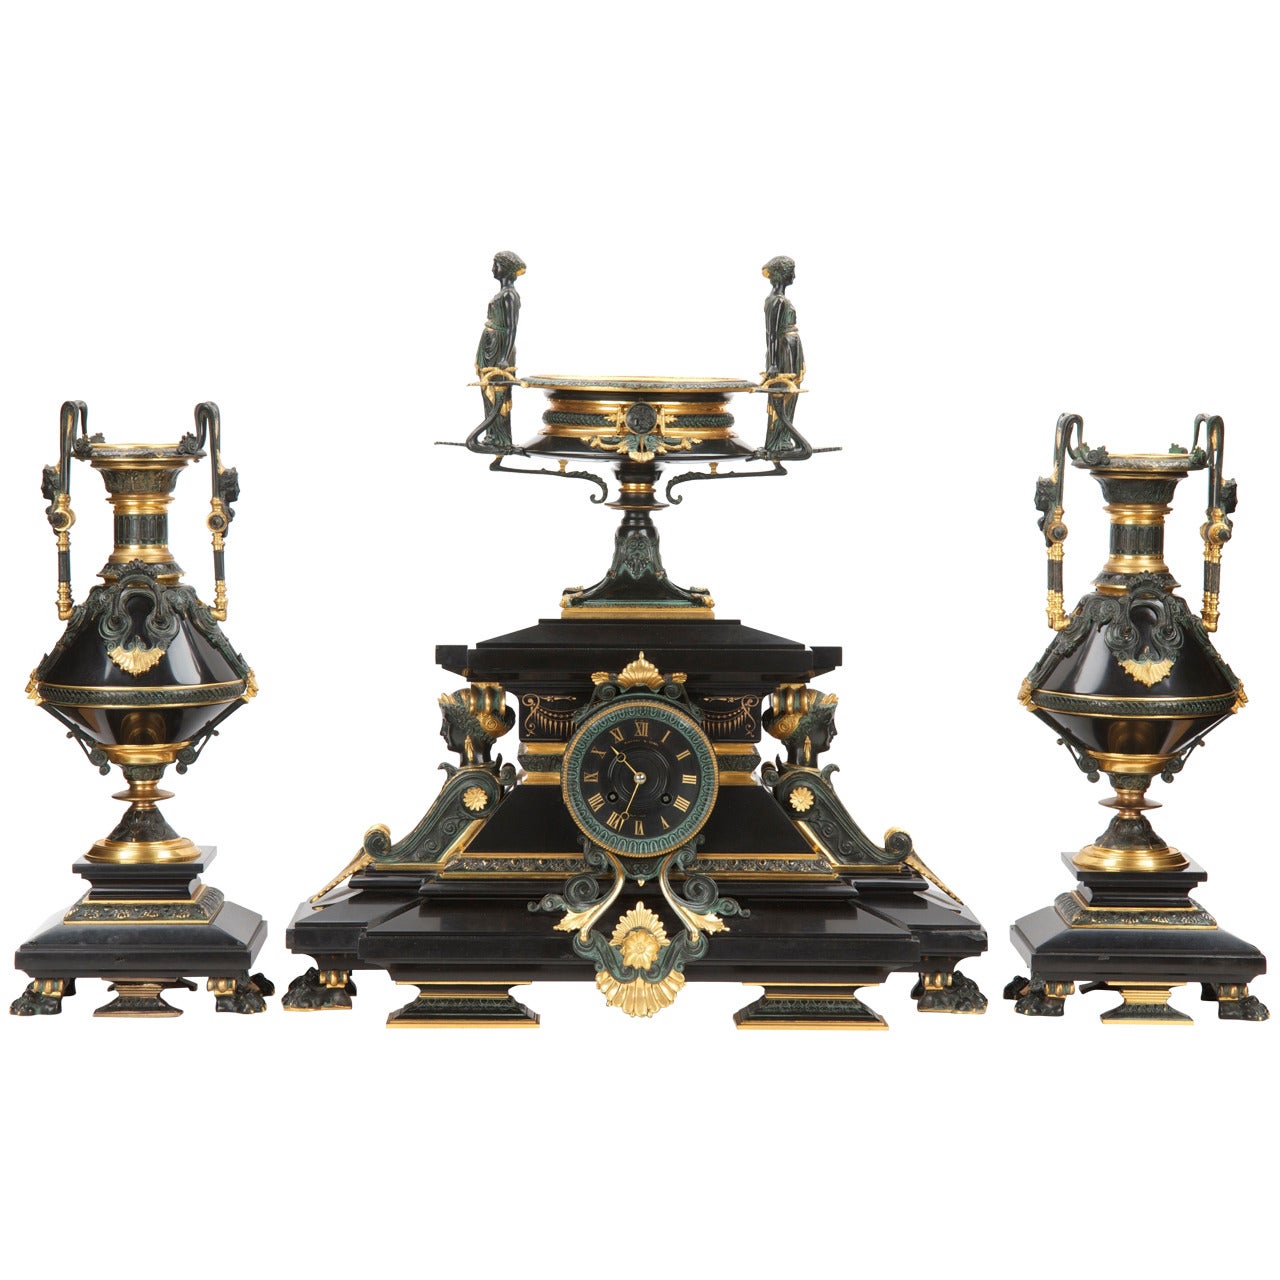 Egyptian Revival Antique Bronze Clock Garniture by Tiffany & Co c. 1880